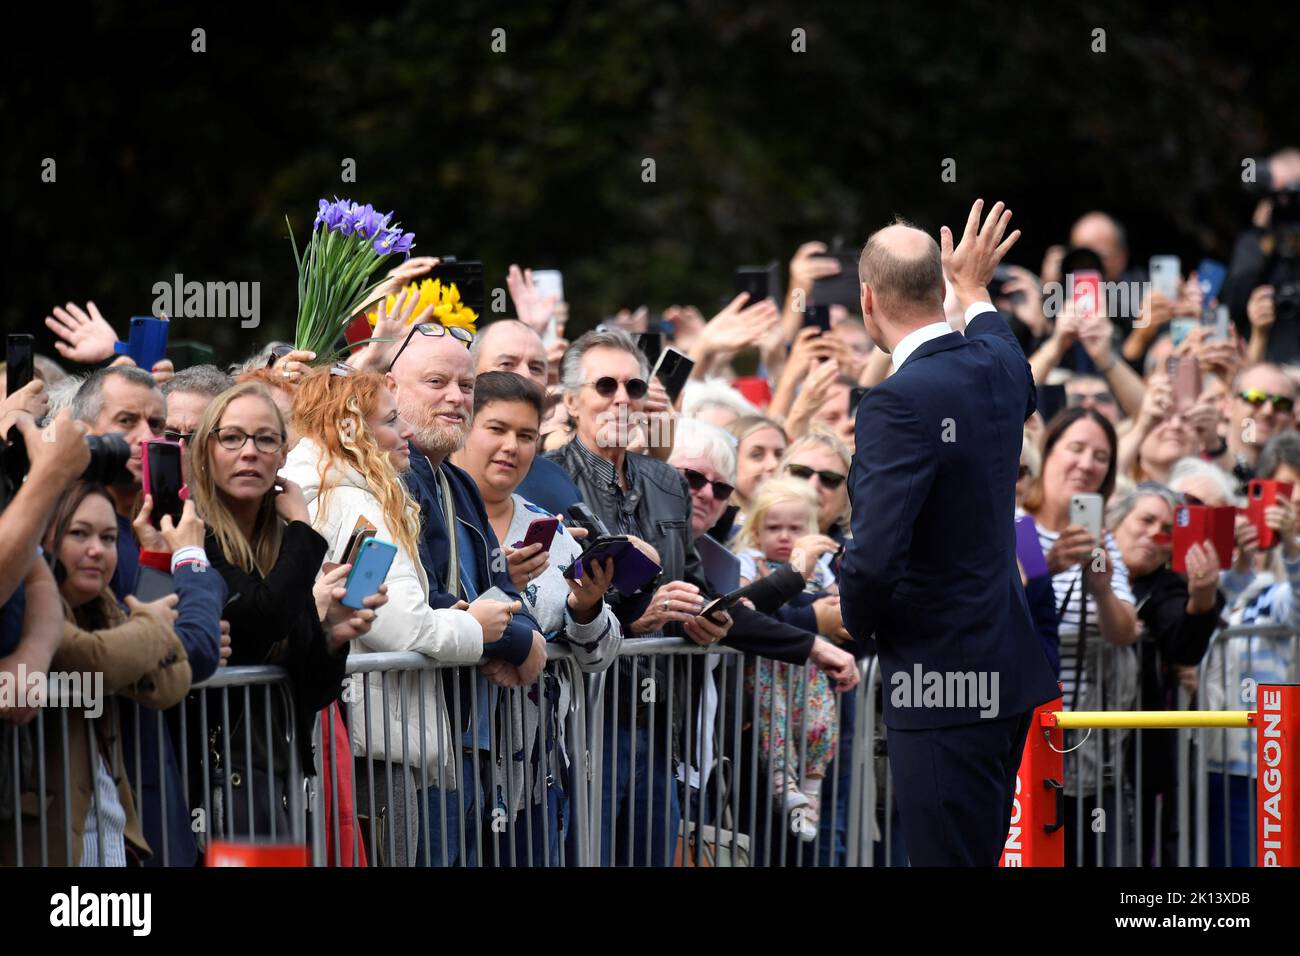 The Prince of Wales meeting wellwishers as he views floral tributes left by members of the public at the gates of Sandringham House in Norfolk, following the death of Queen Elizabeth II. Picture date: Thursday September 15, 2022. Stock Photo